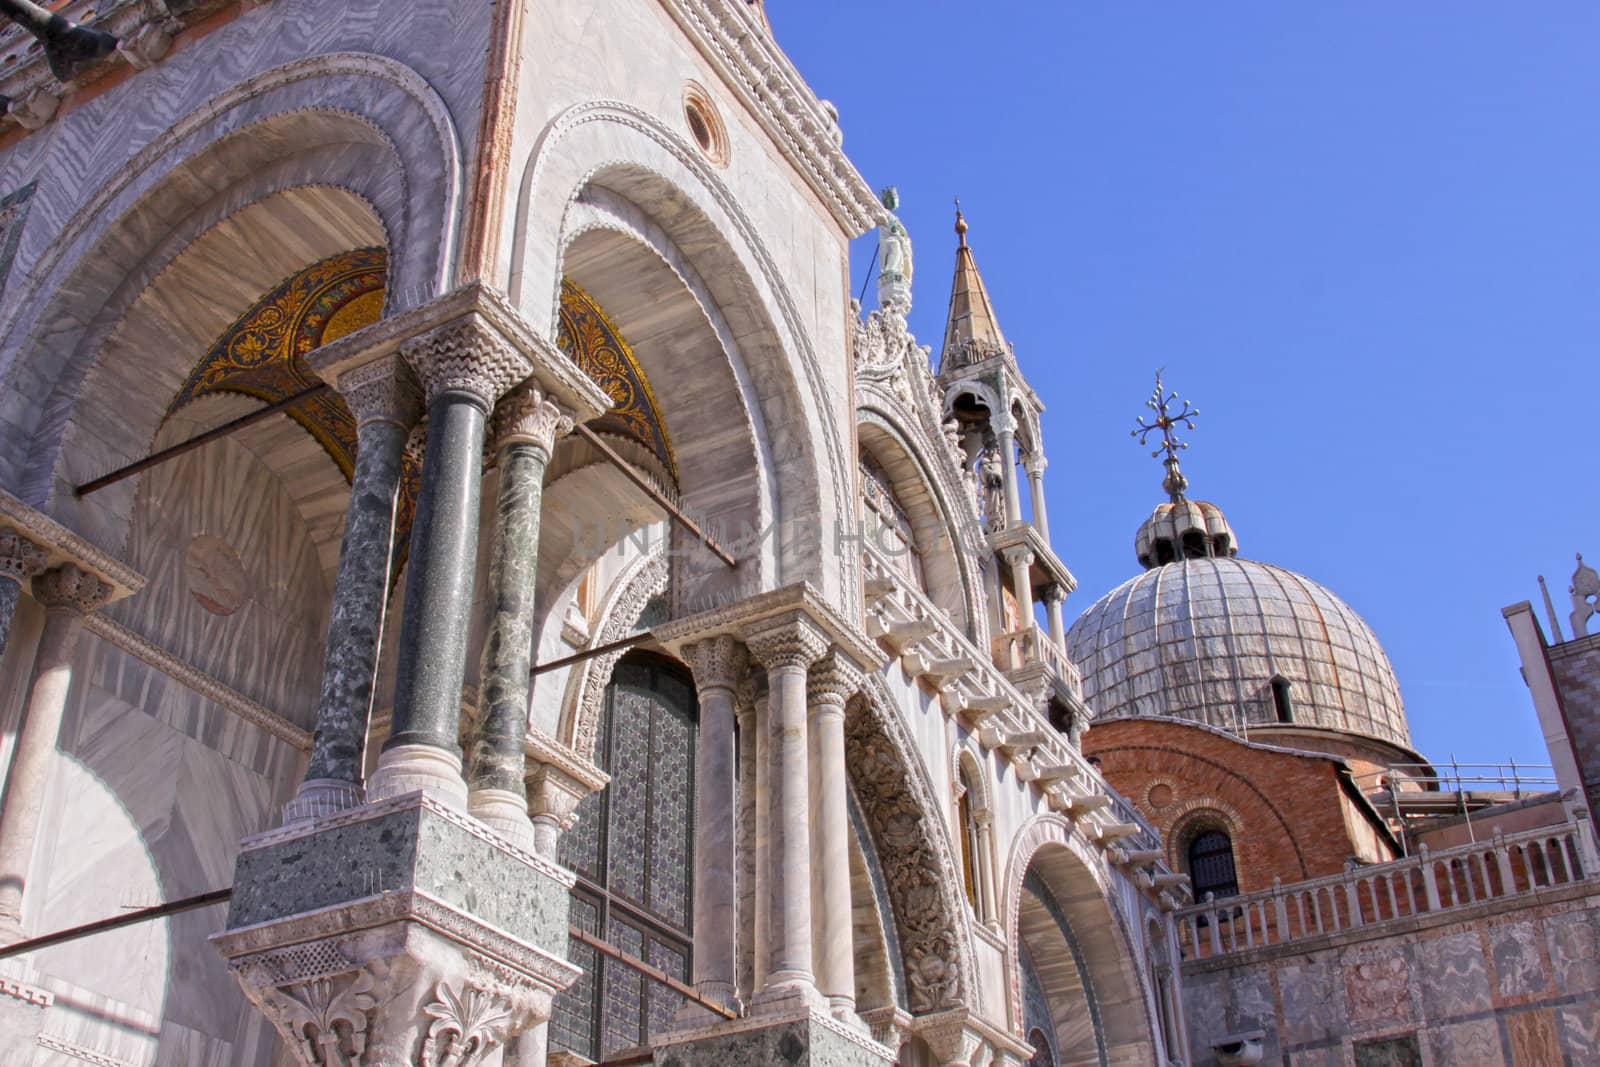 A side-view of Saint Mark's Basilica in Venice, Italy.